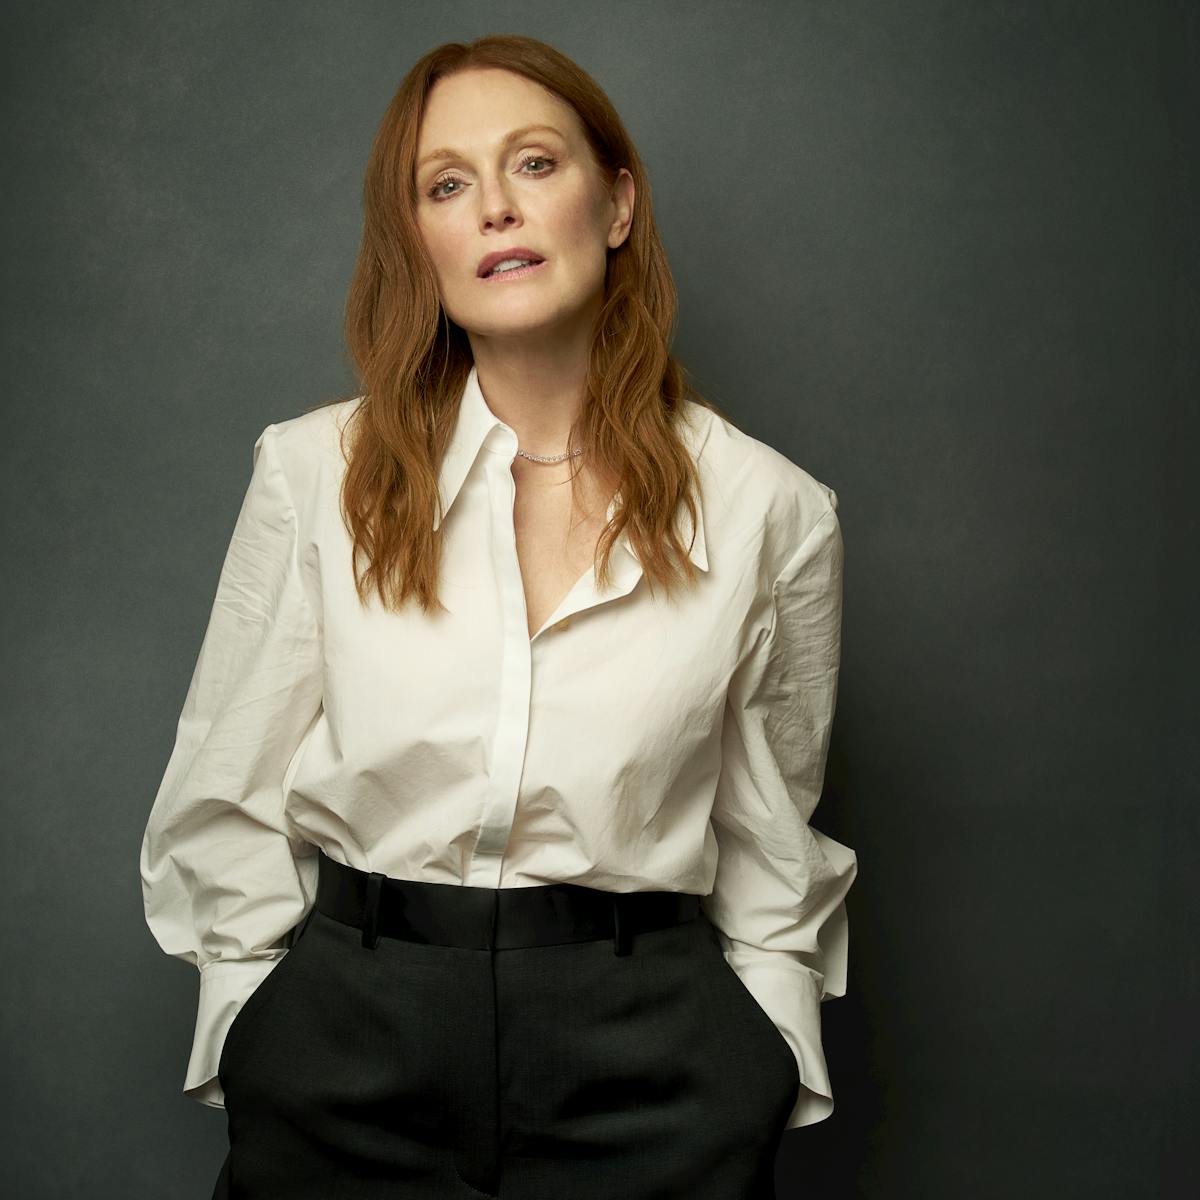 Julianne Moore wears a white shirt and black pants and stands in front of a dark background. 